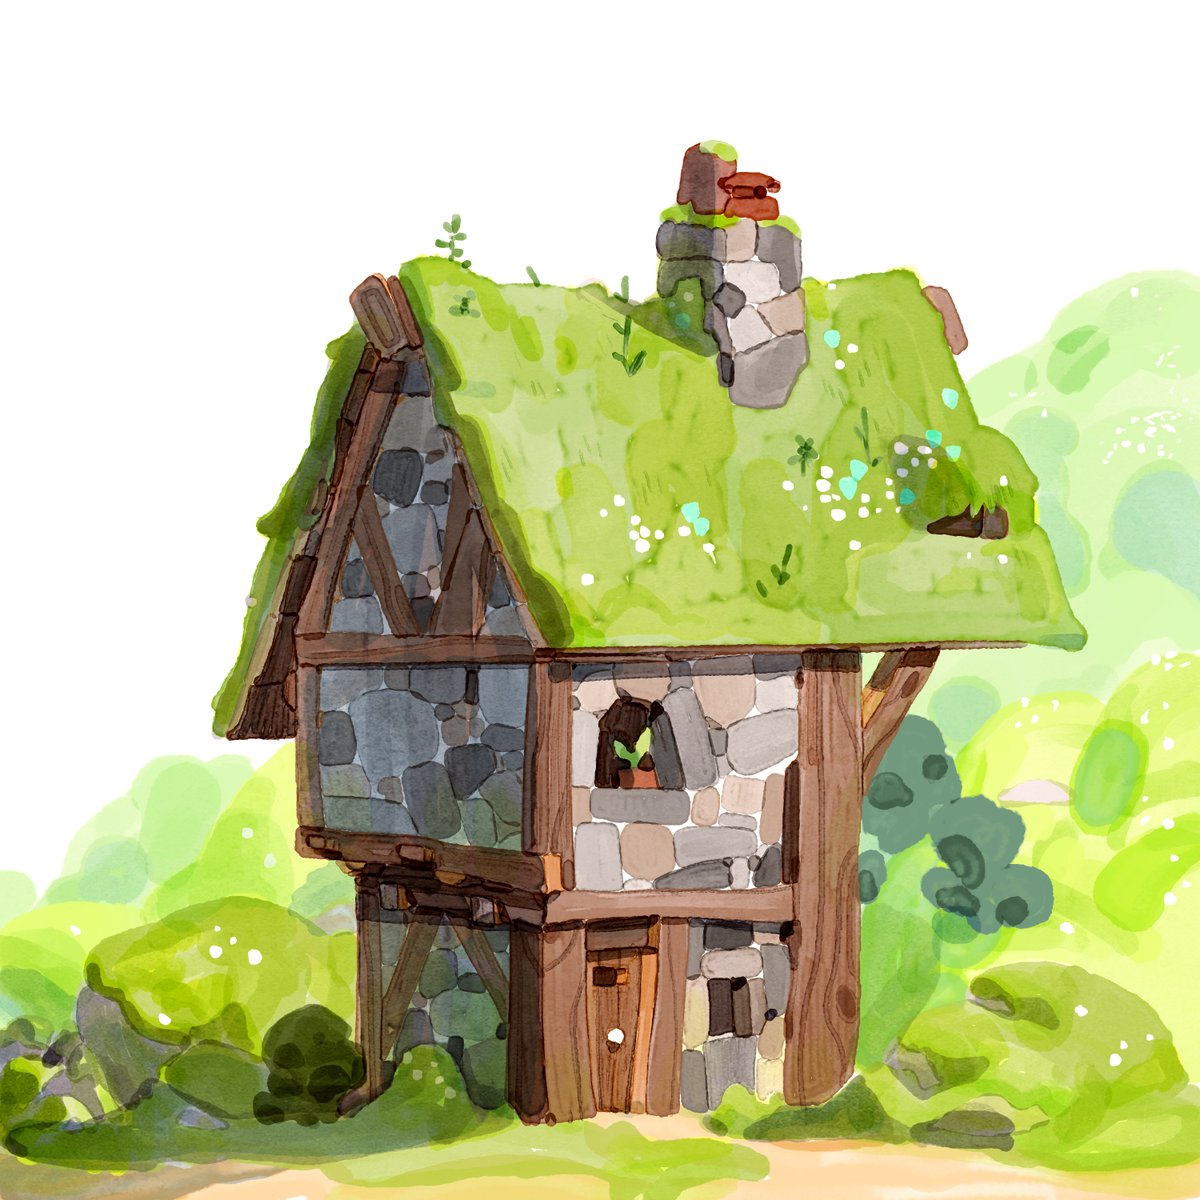 「lil houses ( brushes are kyle webster's 」|AlexandreDiboineのイラスト